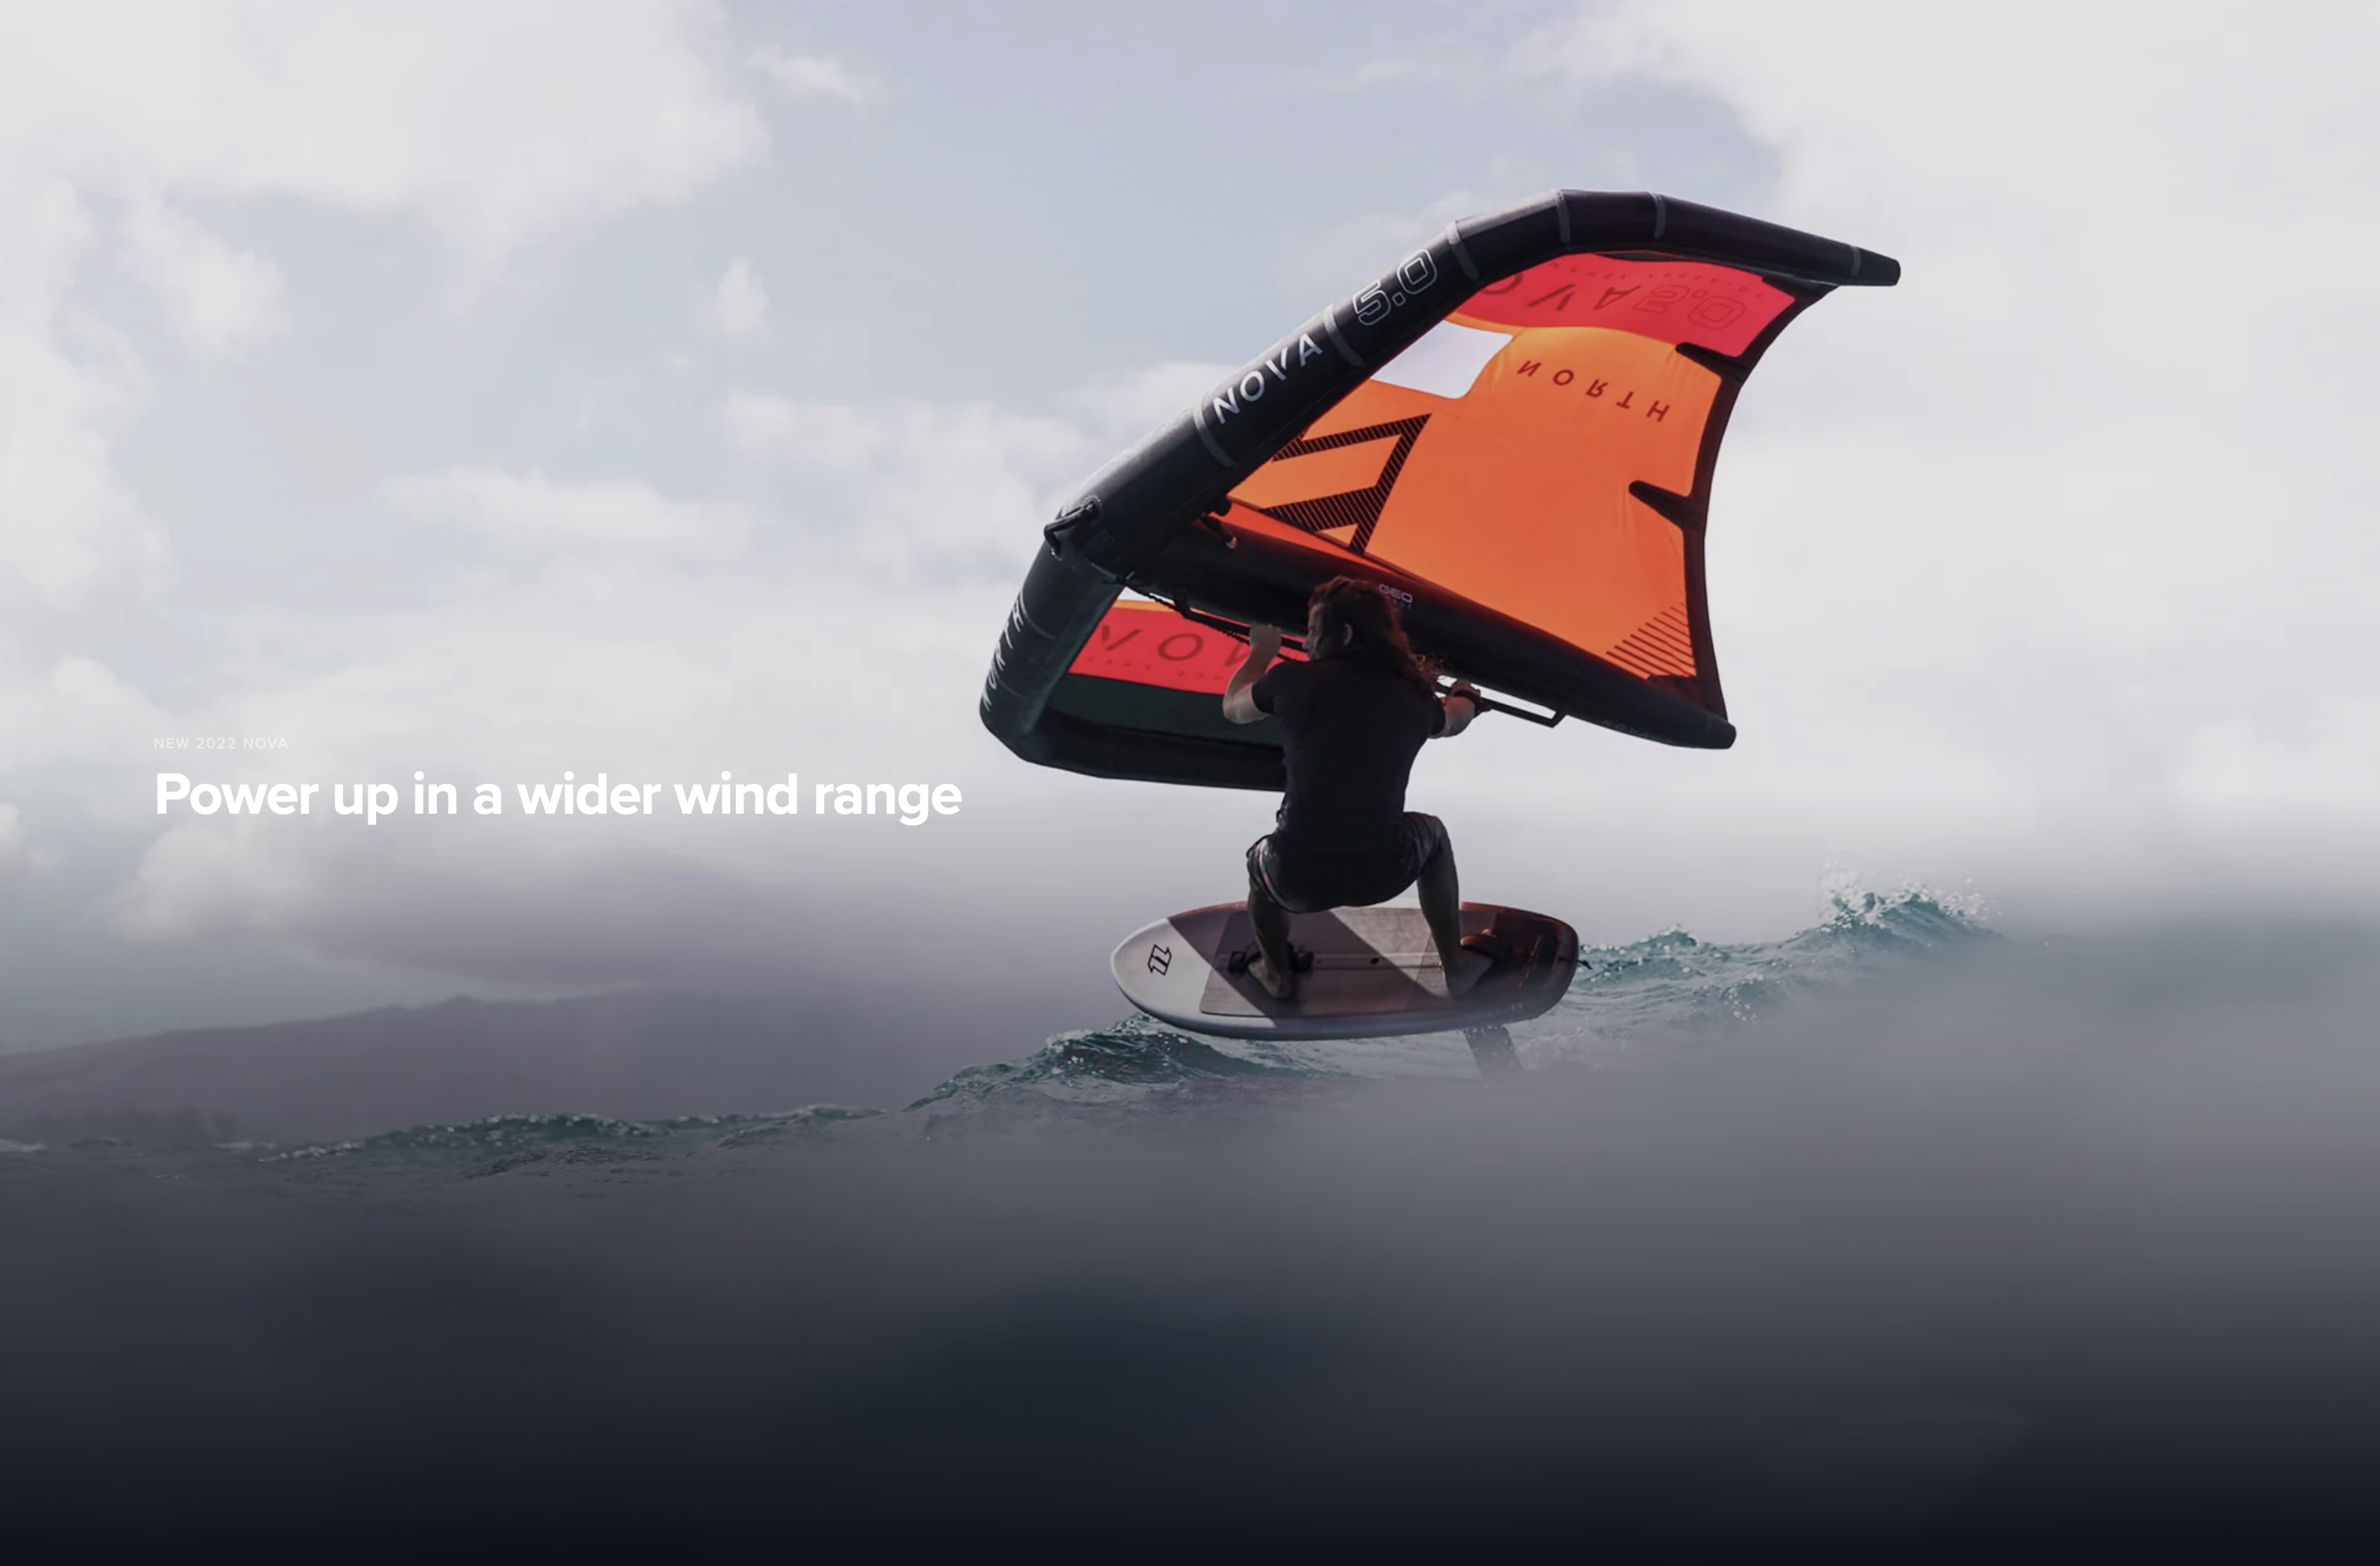 North Nova Wing – Power up in a wider wind range.